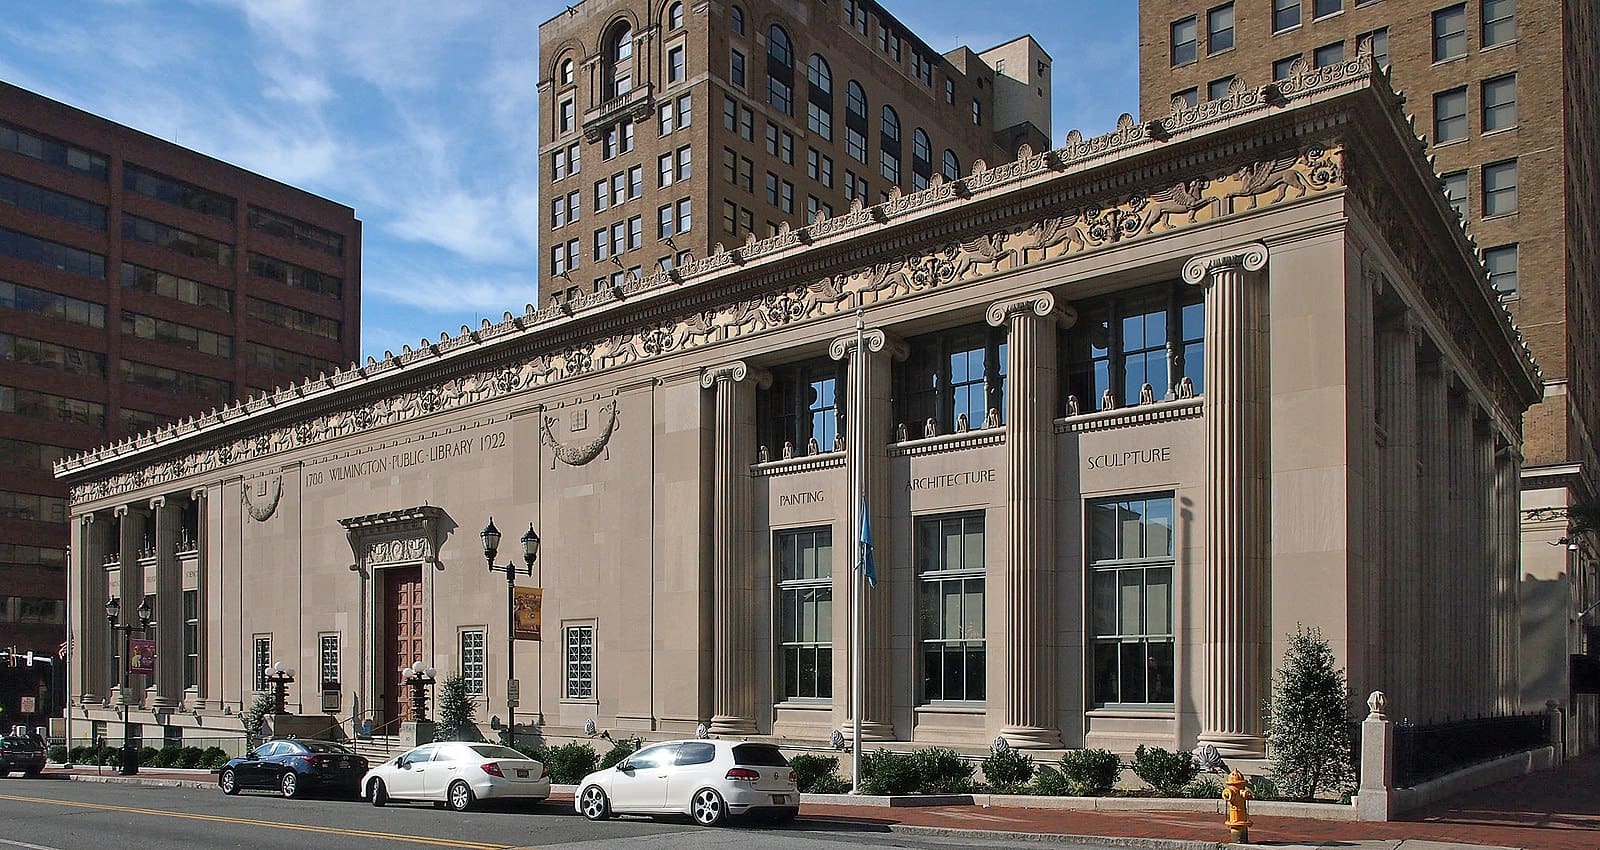 Wilmington library is one of three libraries nationally to receive the 2022 Museum and Library Service National Medal.